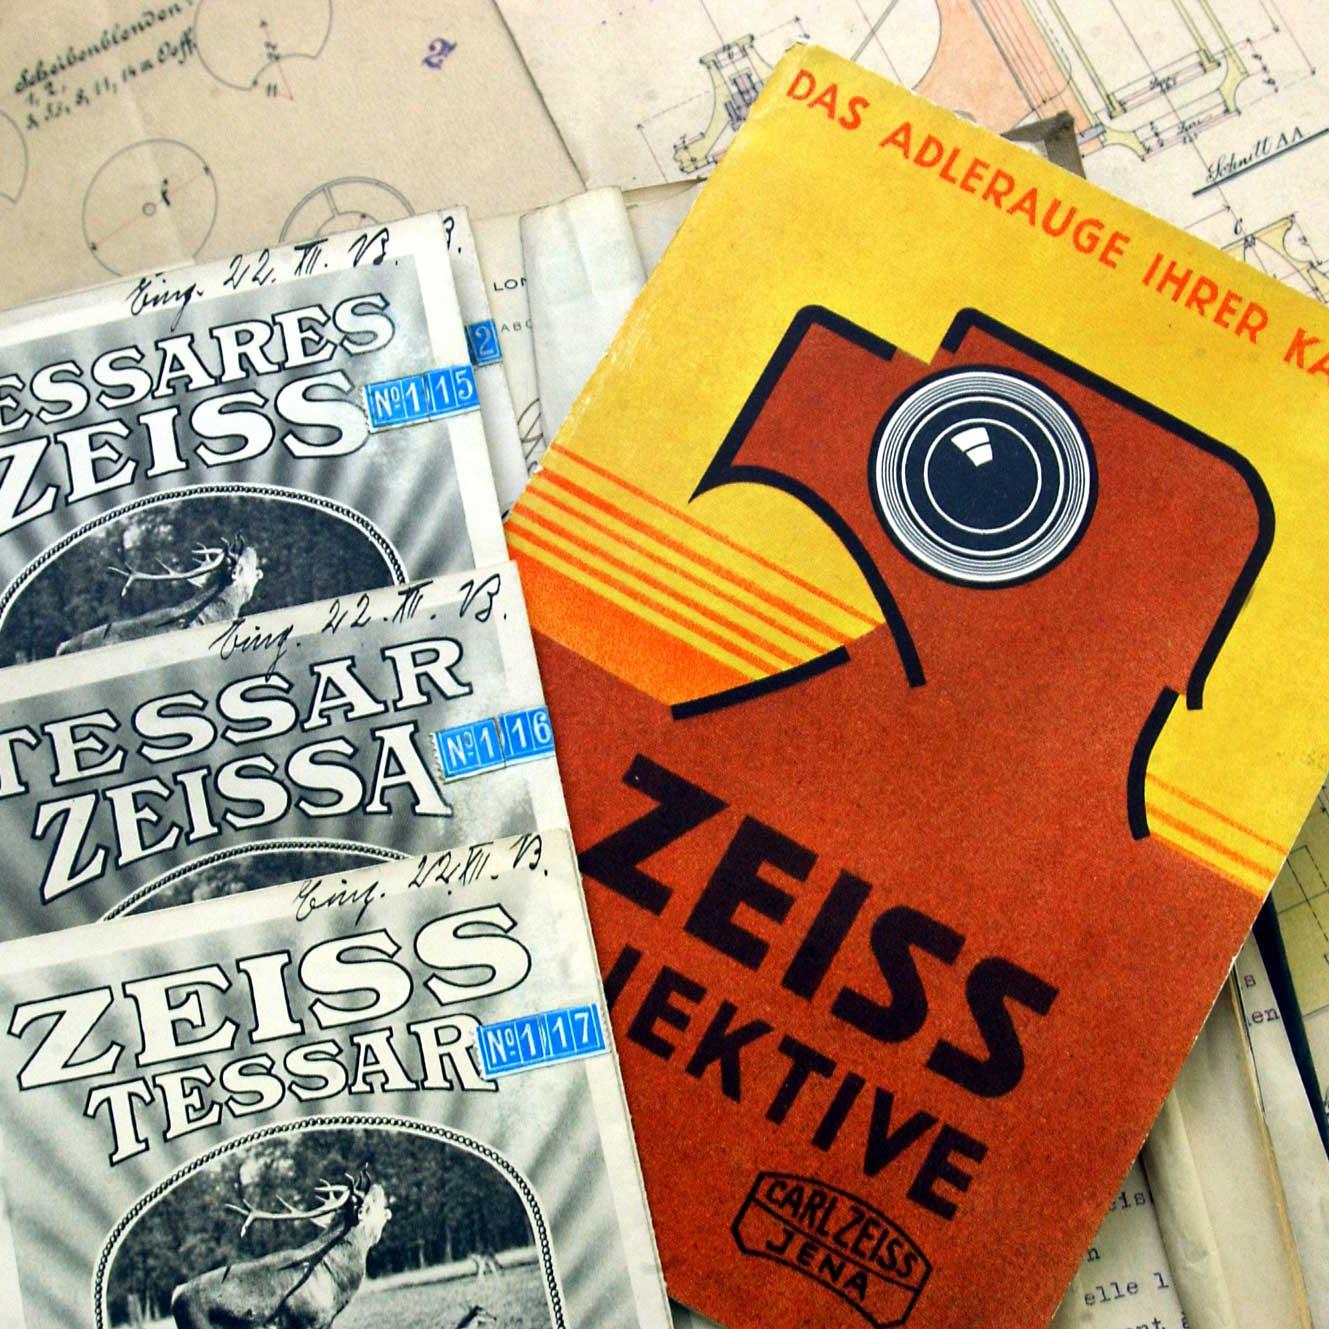 Product literature from the ZEISS Archive